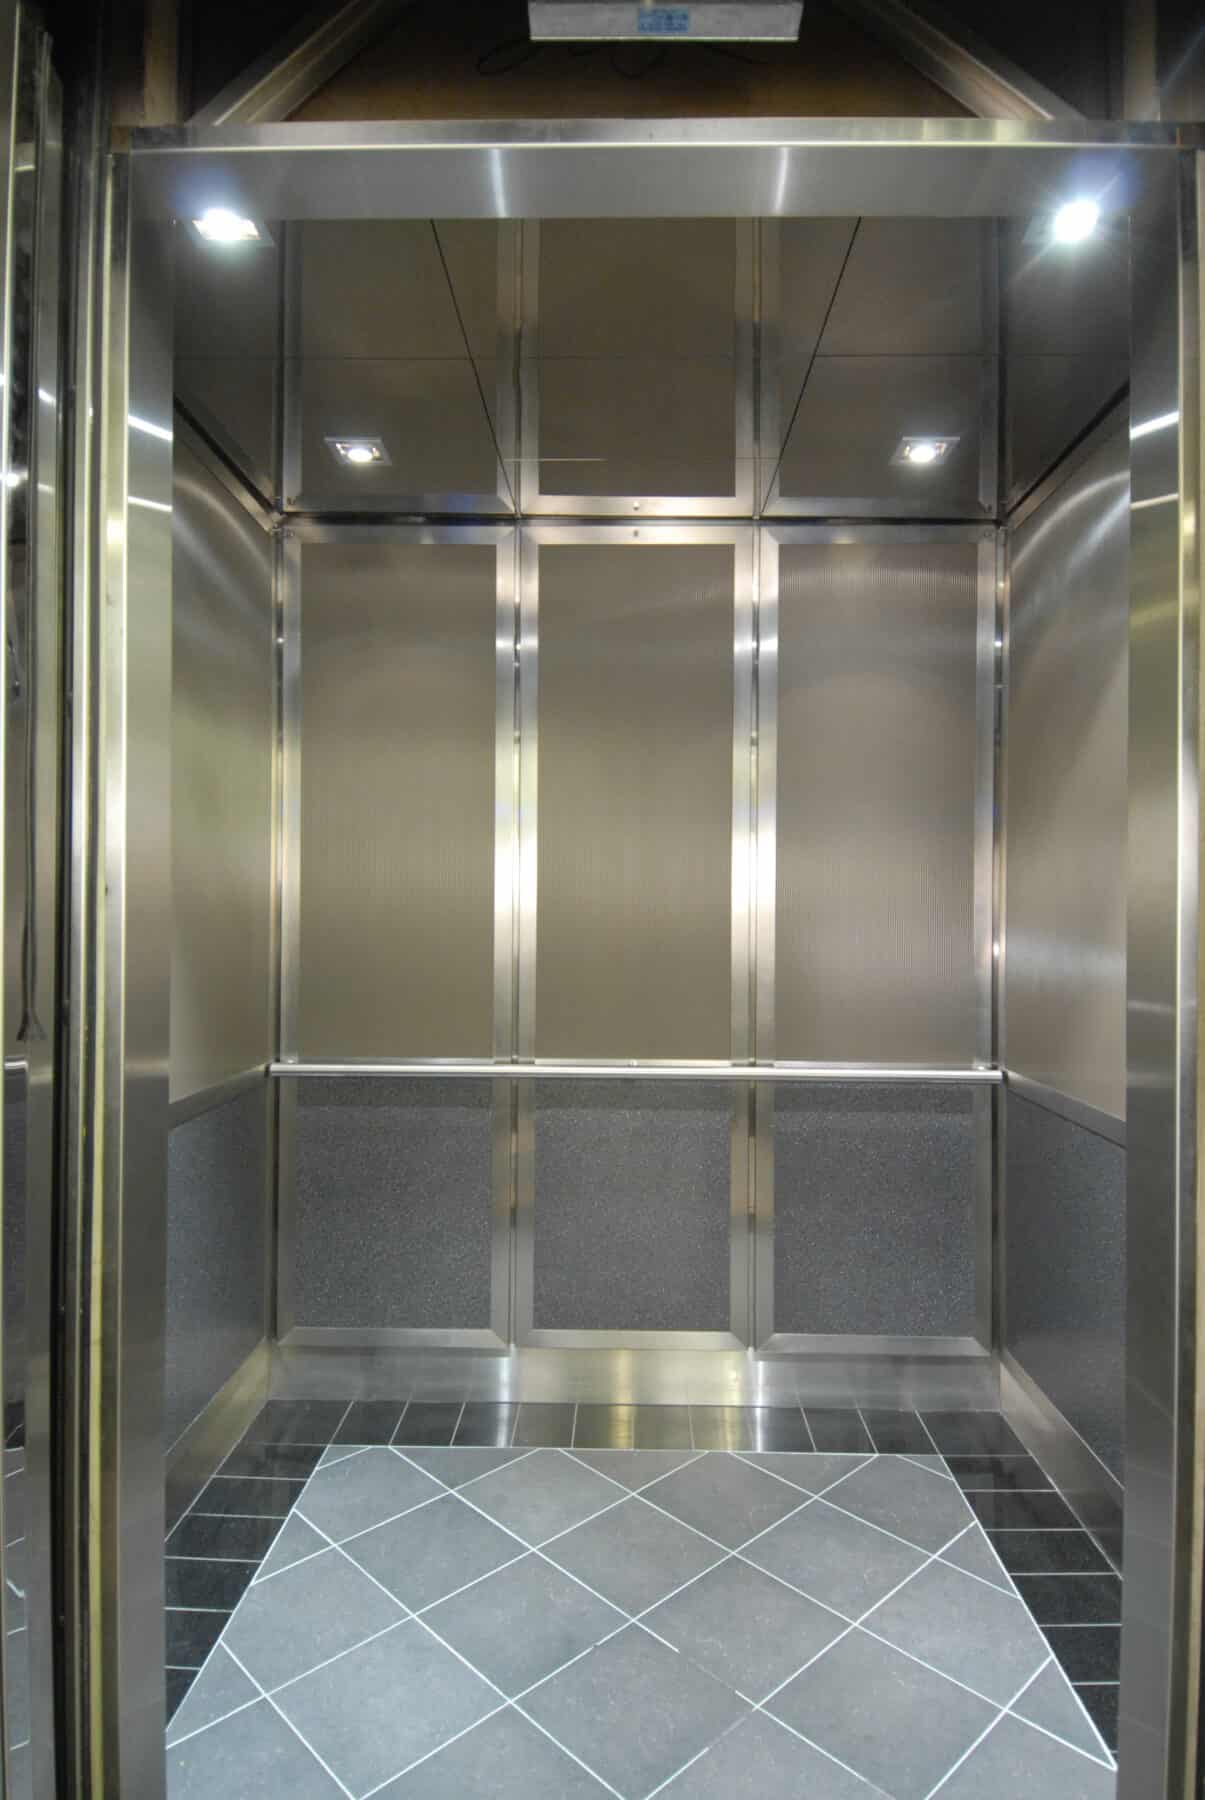 Custom Metalwork Fabrication of Elevator Interiors from Construction Specialty Projects by Commercial Builder & General Contractor Structural Enterprises